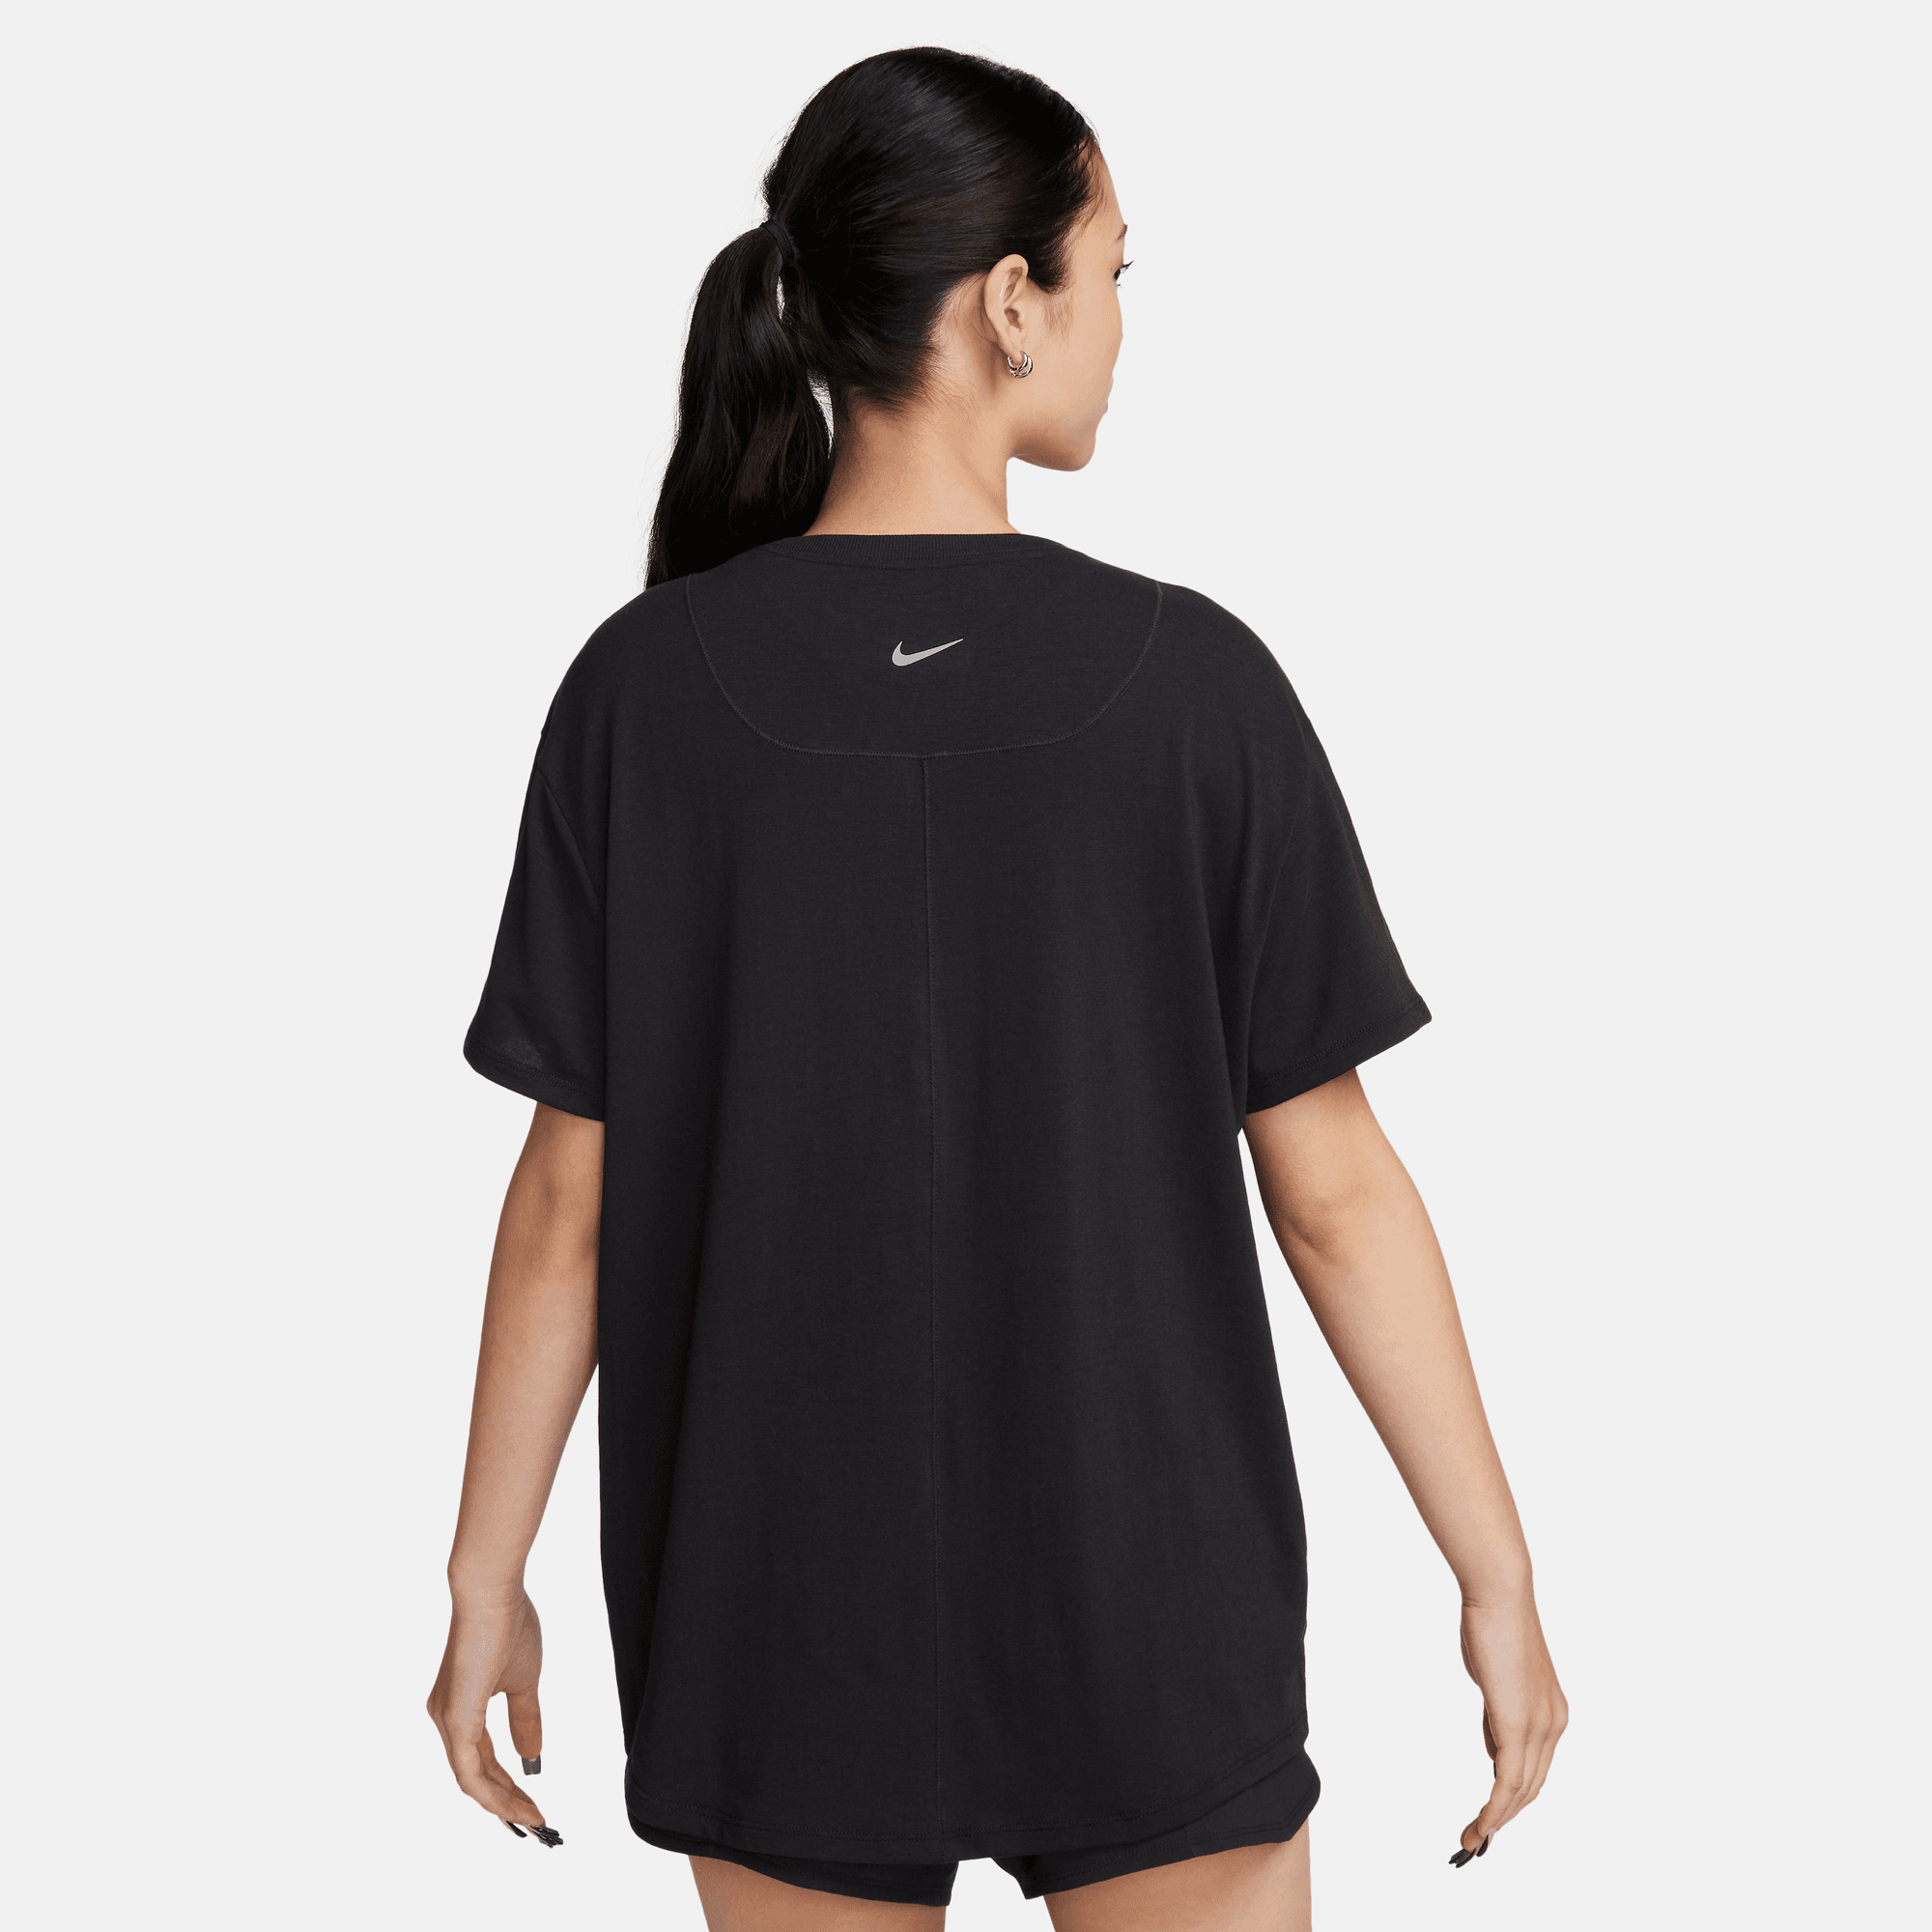 NIKE ONE RELAXED WOMEN'S DRI-FIT SHORT-SLEEVE  TOP